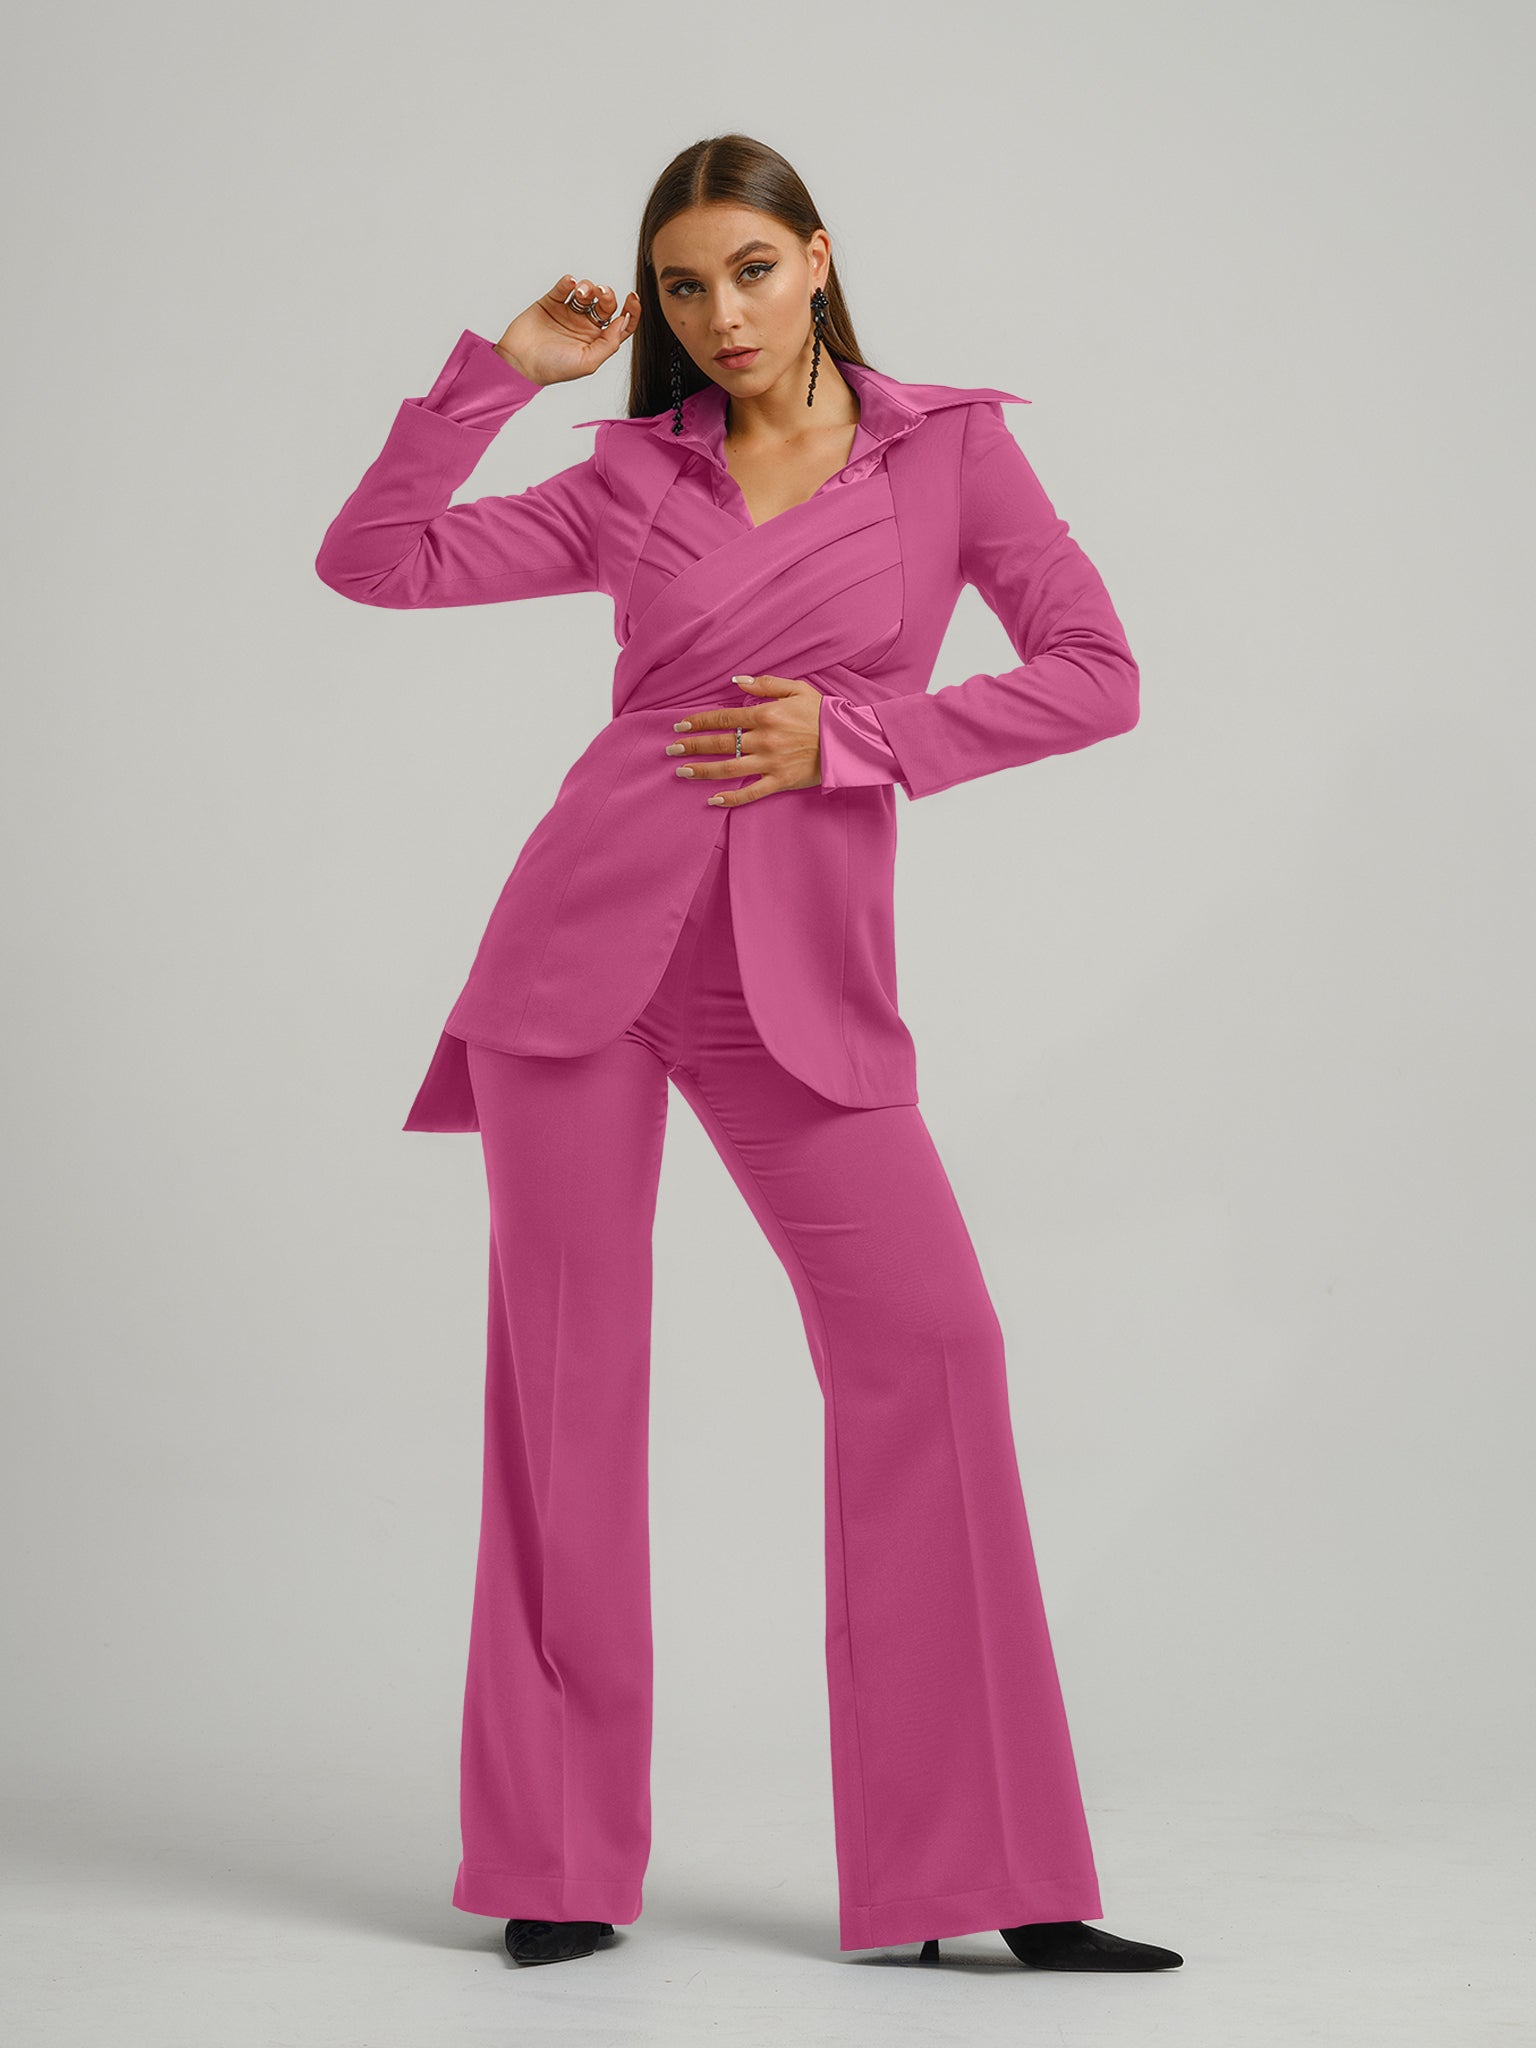 Tia Dorraine Sweet Desire Statement Cross Wrap Blazer This thigh-length design reimagines the classic blazer with a generous helping of creative flair. The piece features an impressive cross drape panels that create a sweetheart neckline when tied at the